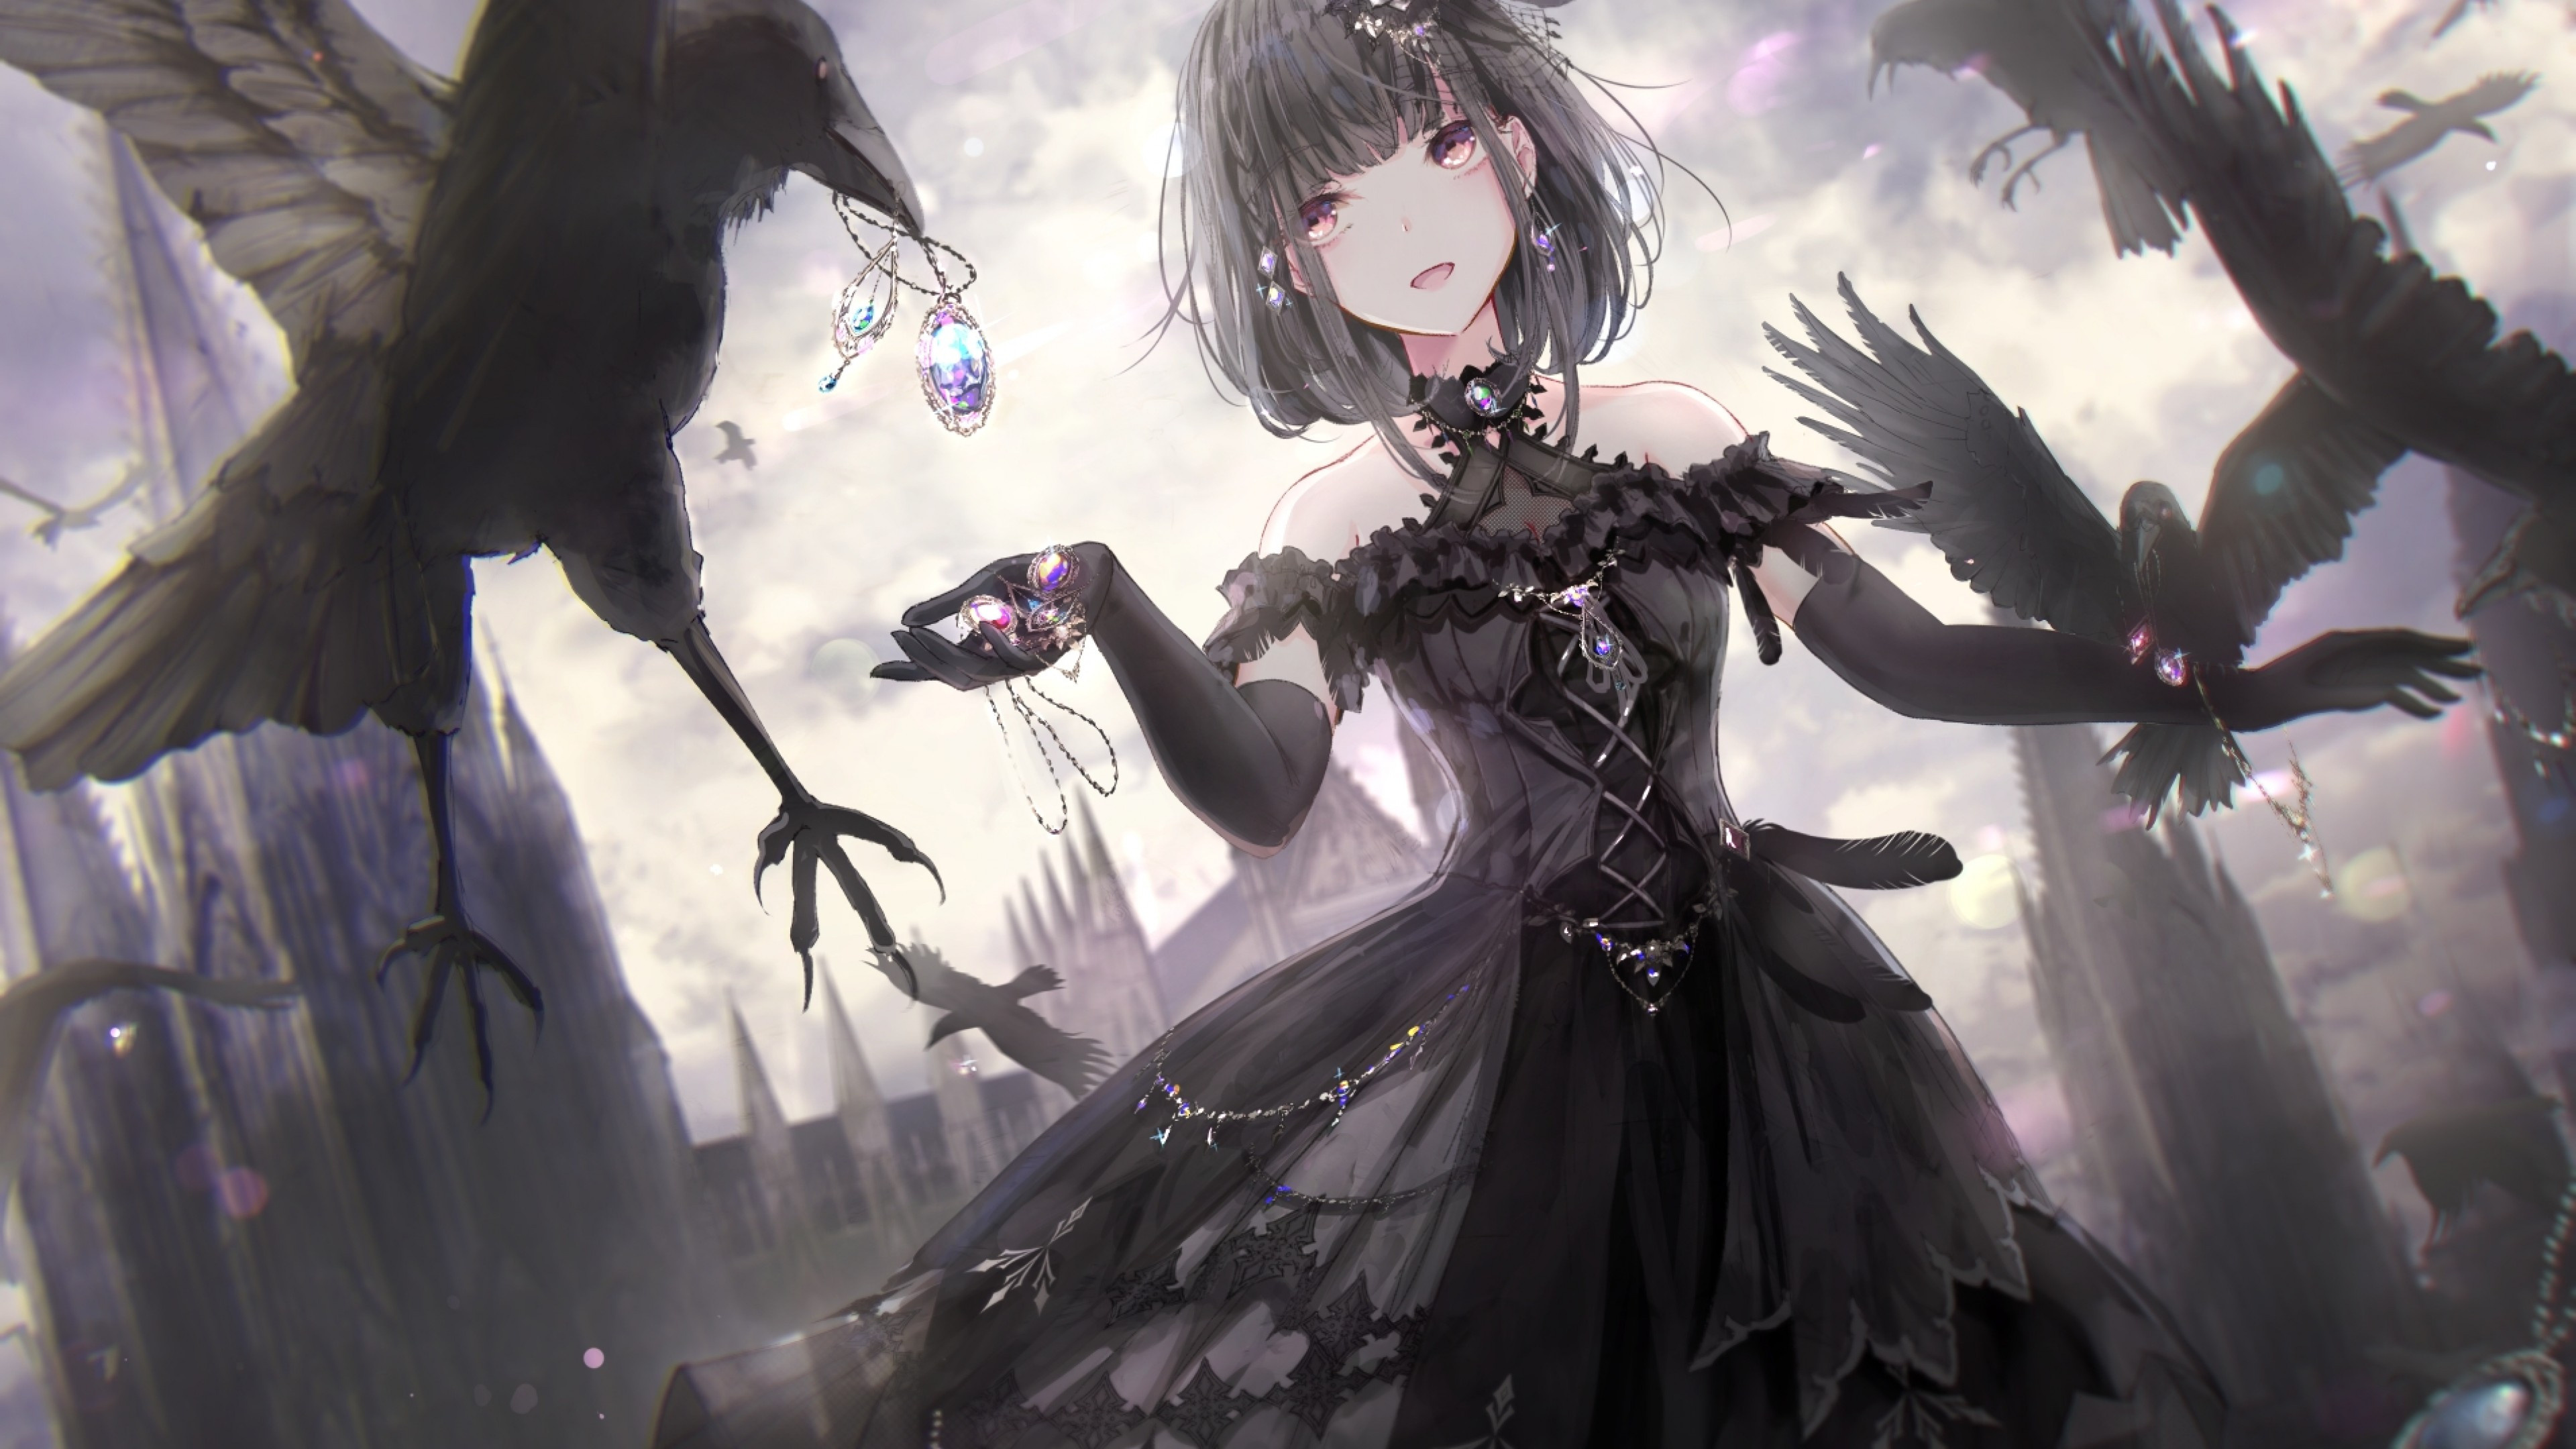 Download Anime Goth Girl With Red Eyes